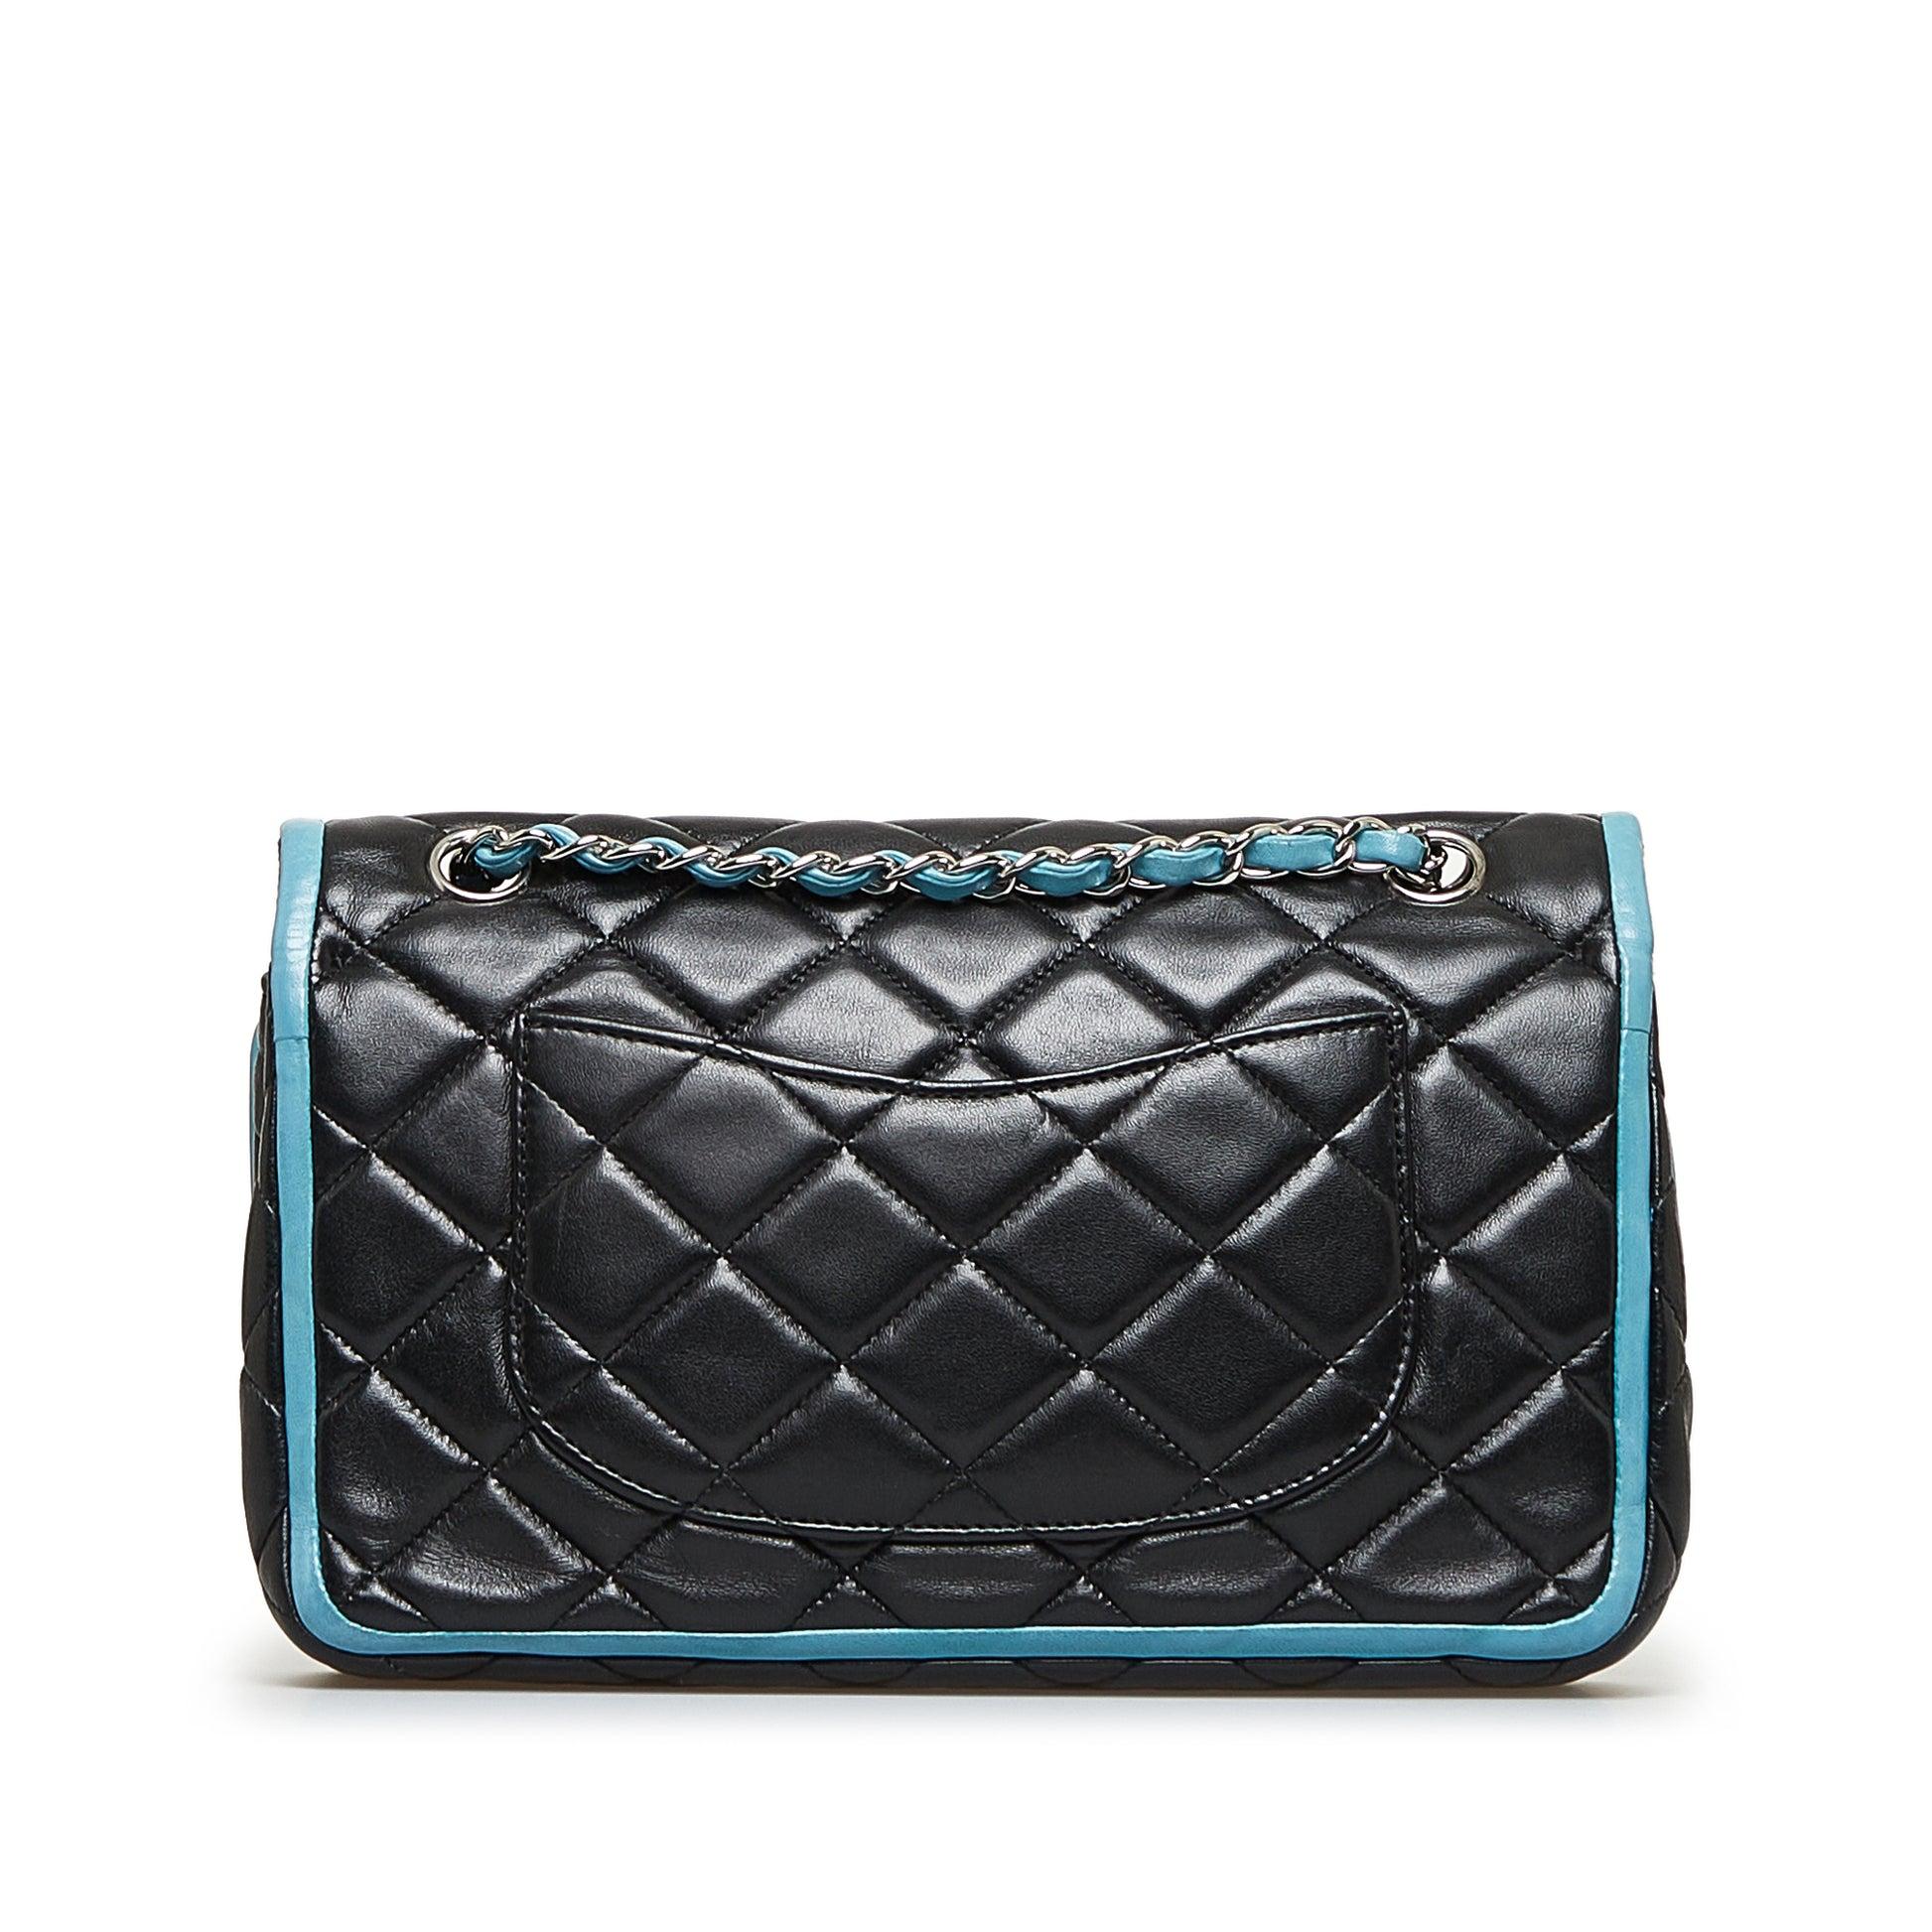 Chanel 2006 Medium Double Classic Flap in Black Lambskin Turquoise Piping Bag For Sale 6